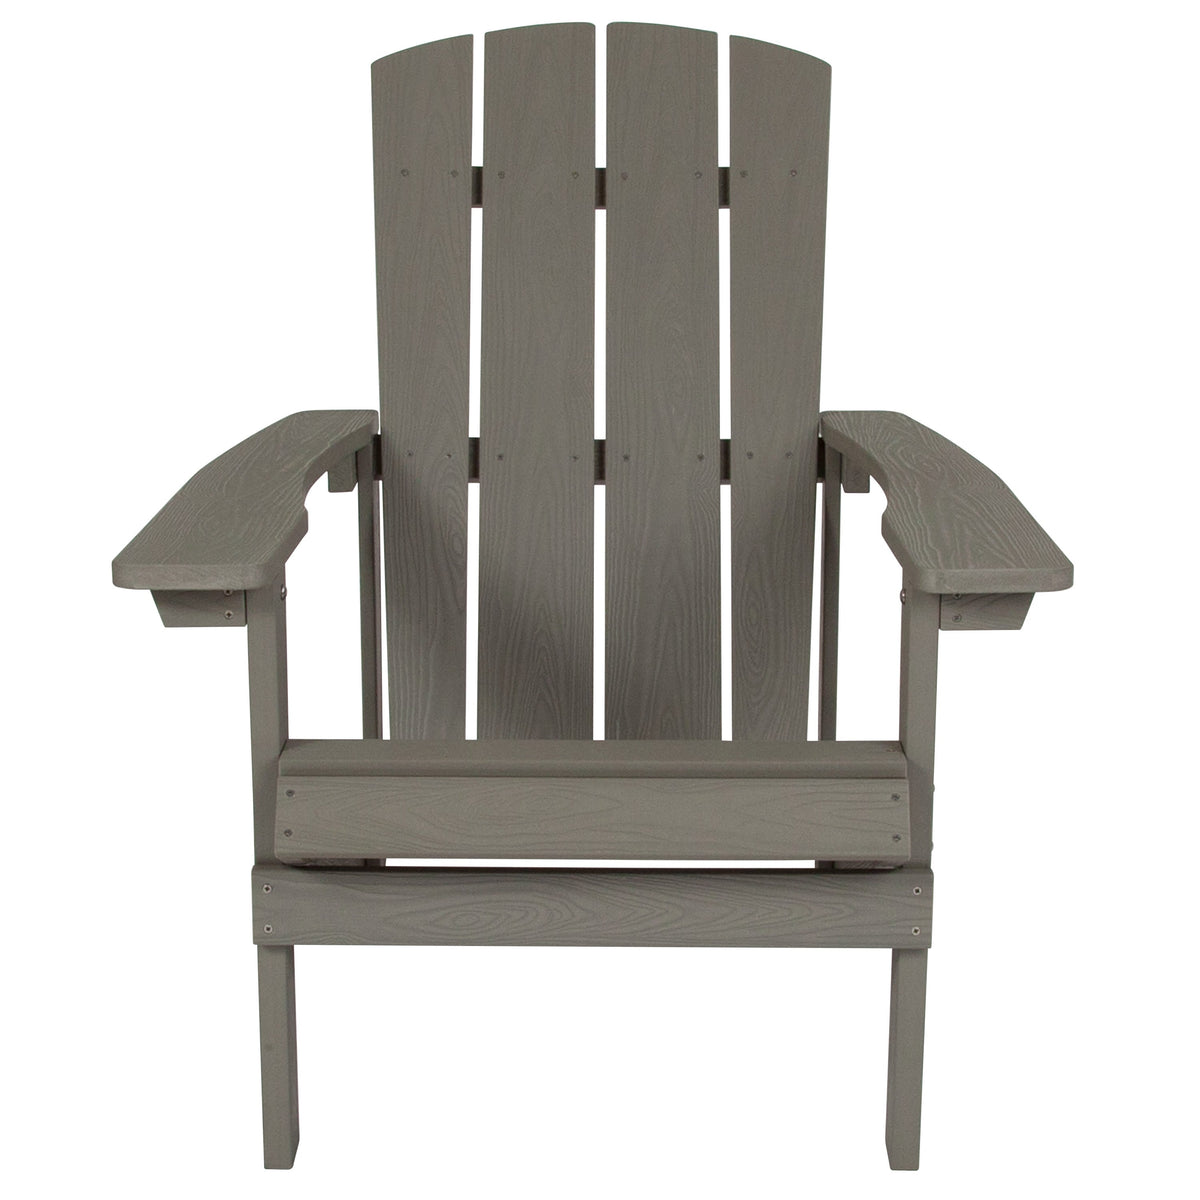 Gray |#| Outdoor Gray All-Weather Poly Resin Wood Adirondack Chair